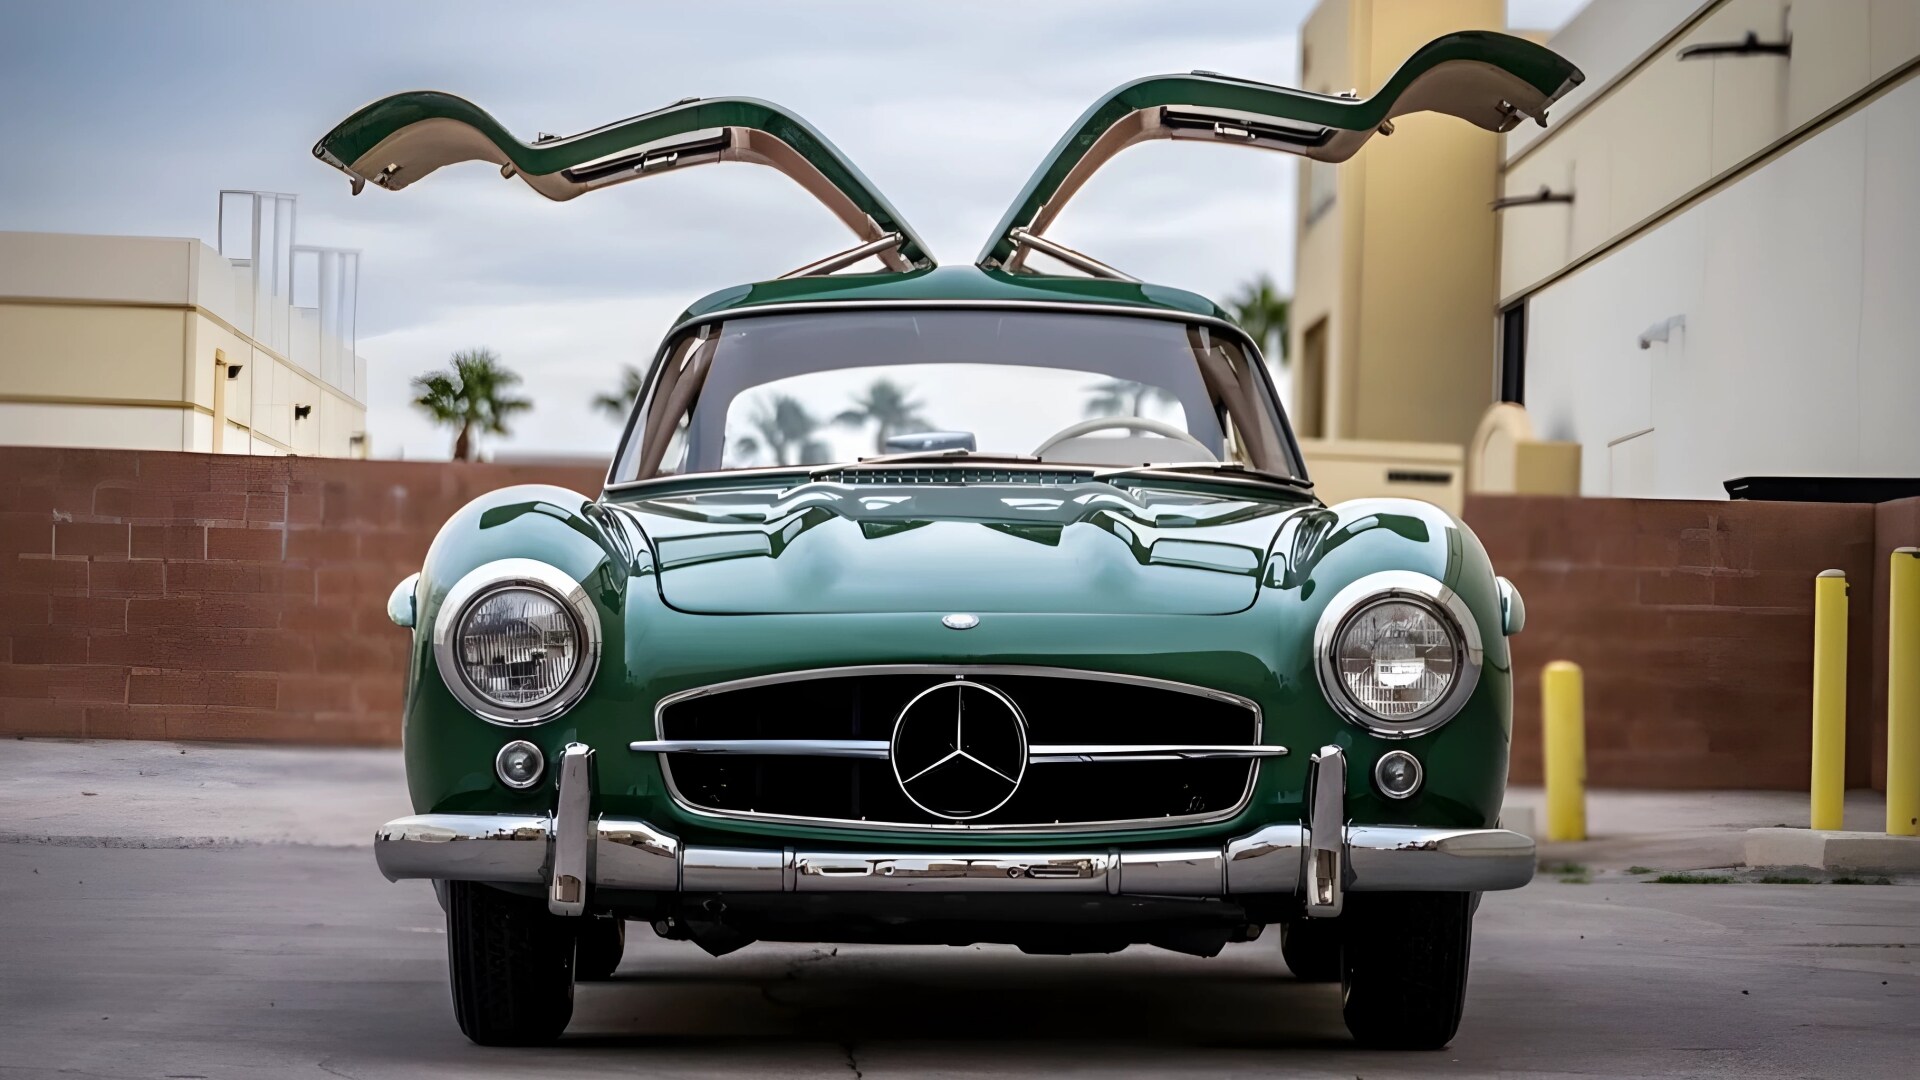 The Front Profile Of The 1955 Mercedes-Benz 300SL Gullwing